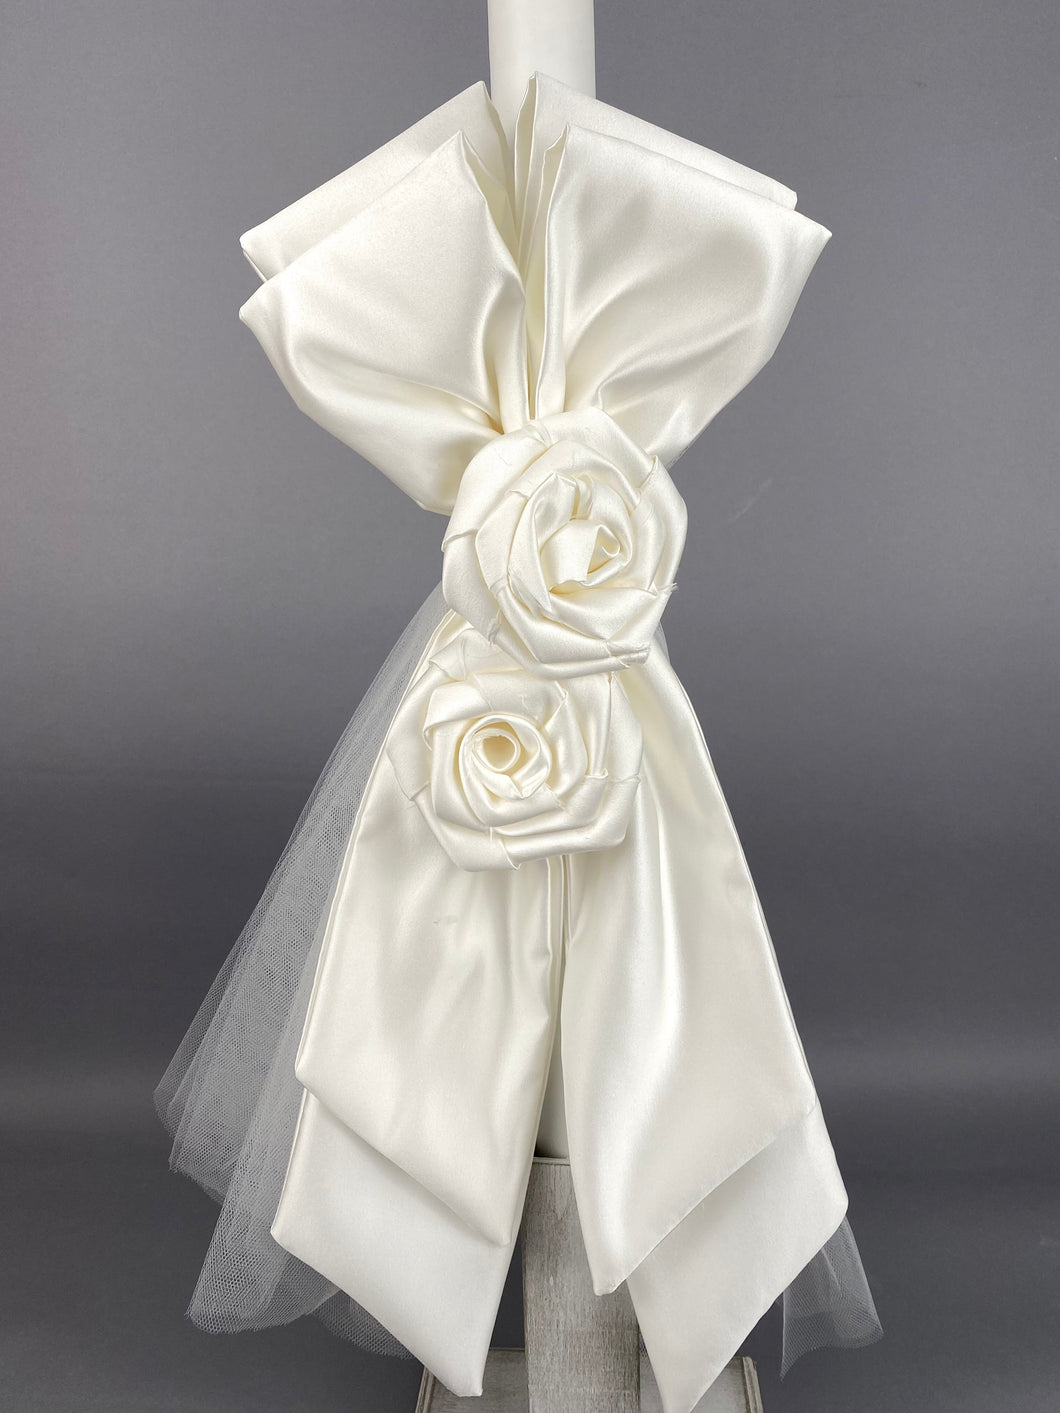 White Satin Double Bow 32” Baptismal Candle with Satin Flowers and Tulle  GC20221  made in Greece